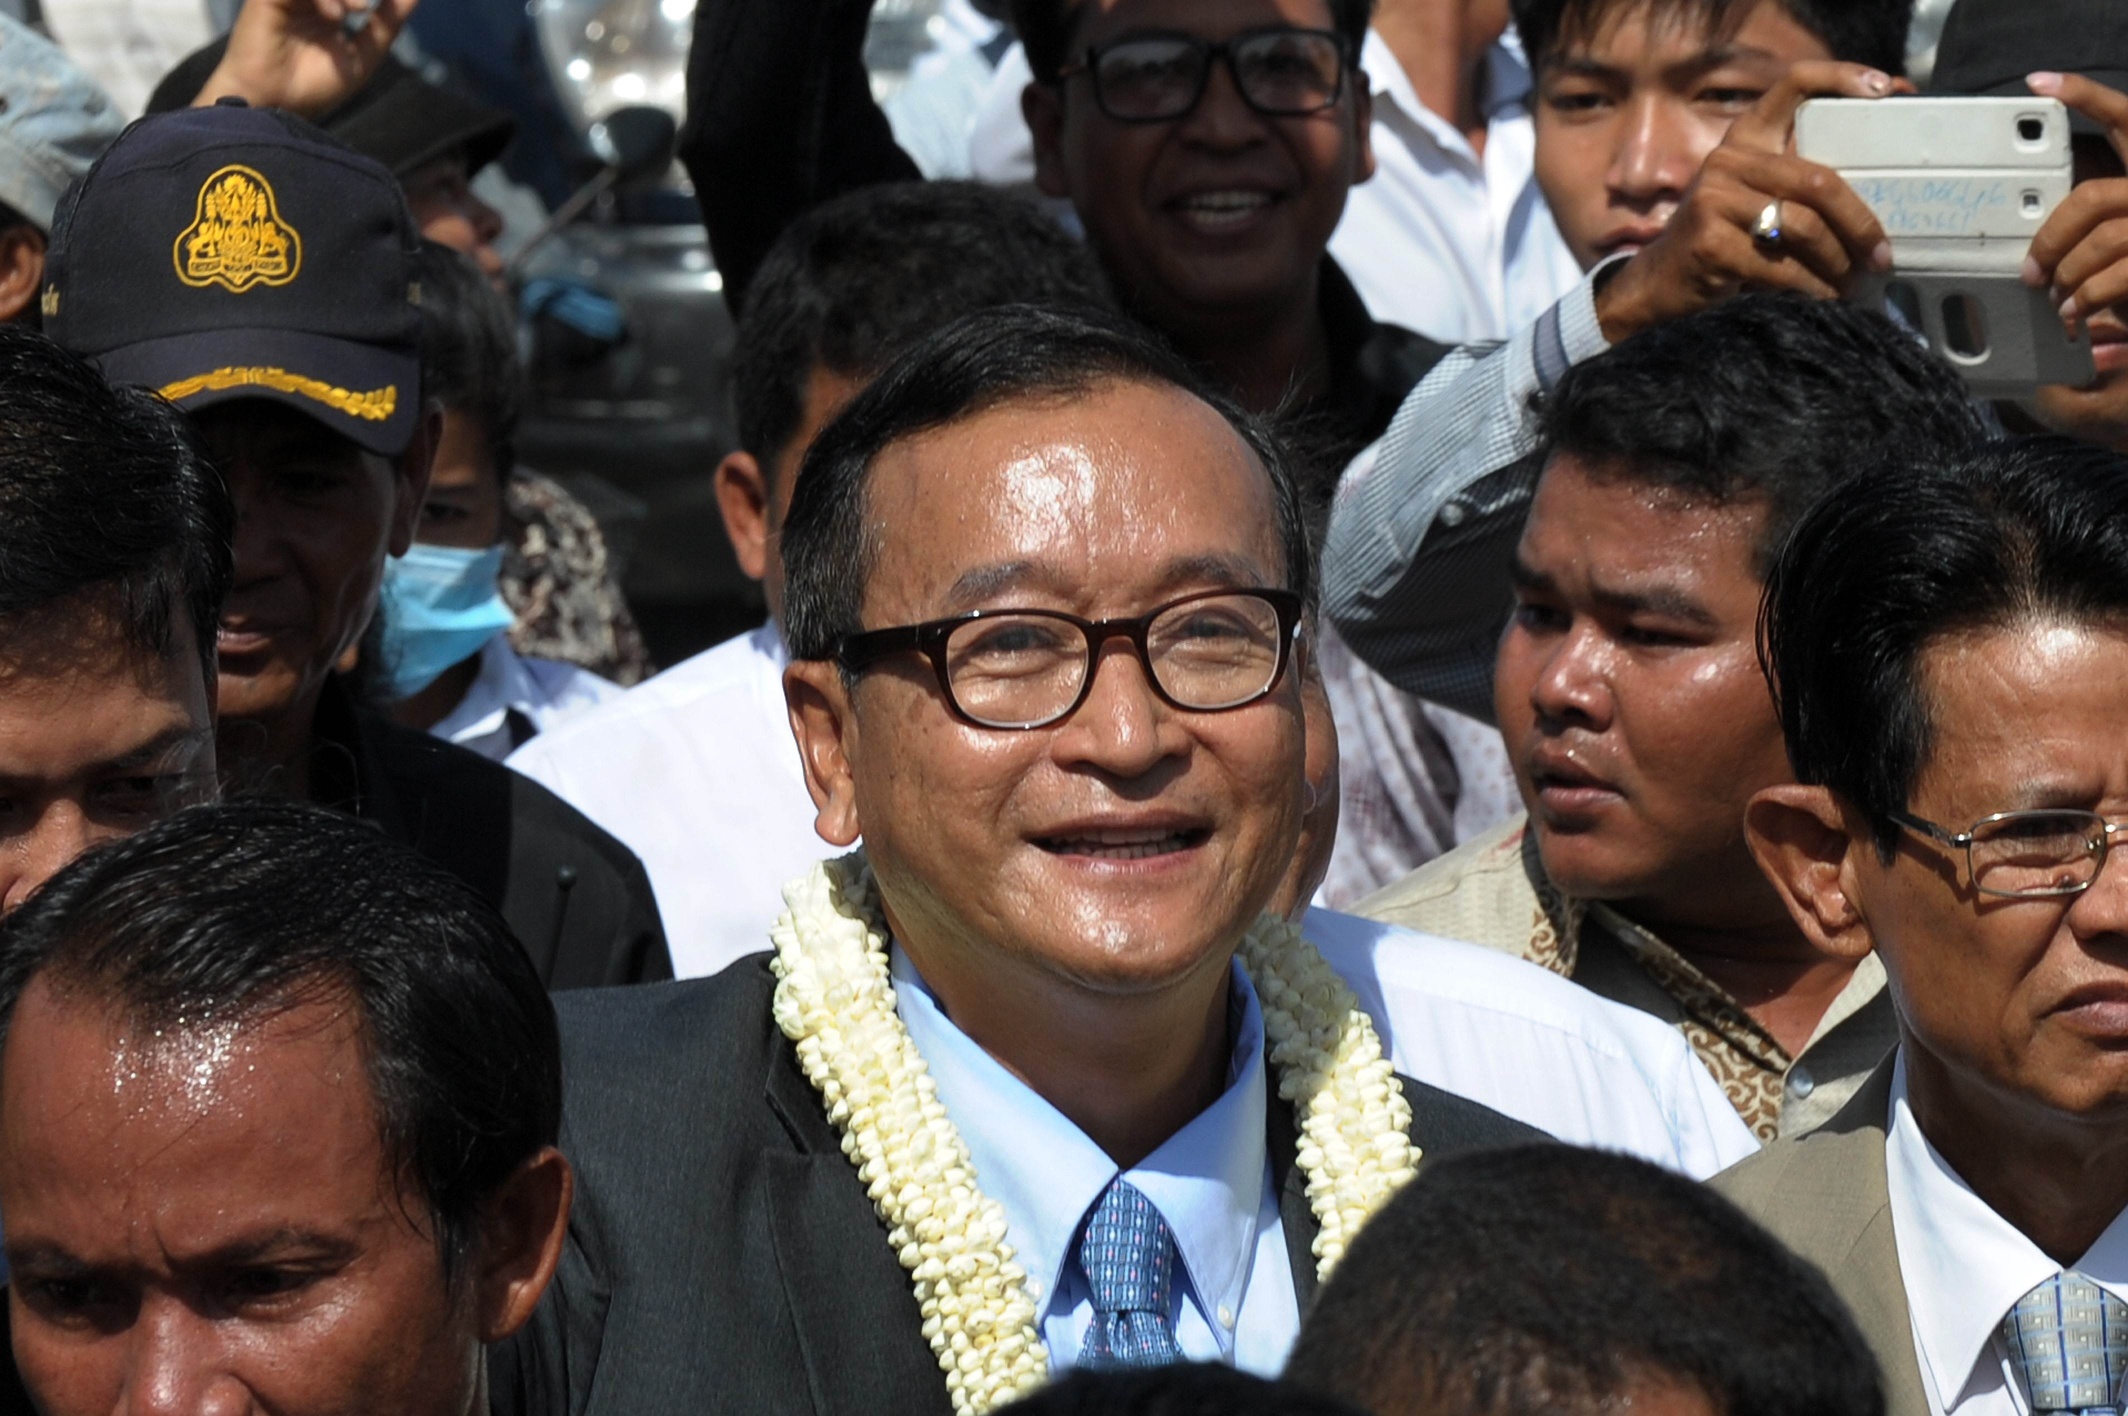 Sam Rainsy (C), leader of the opposition Cambodia National Rescue Party (CNRP), smiles along a street in Phnom Penh on Friday. Photo: AFP